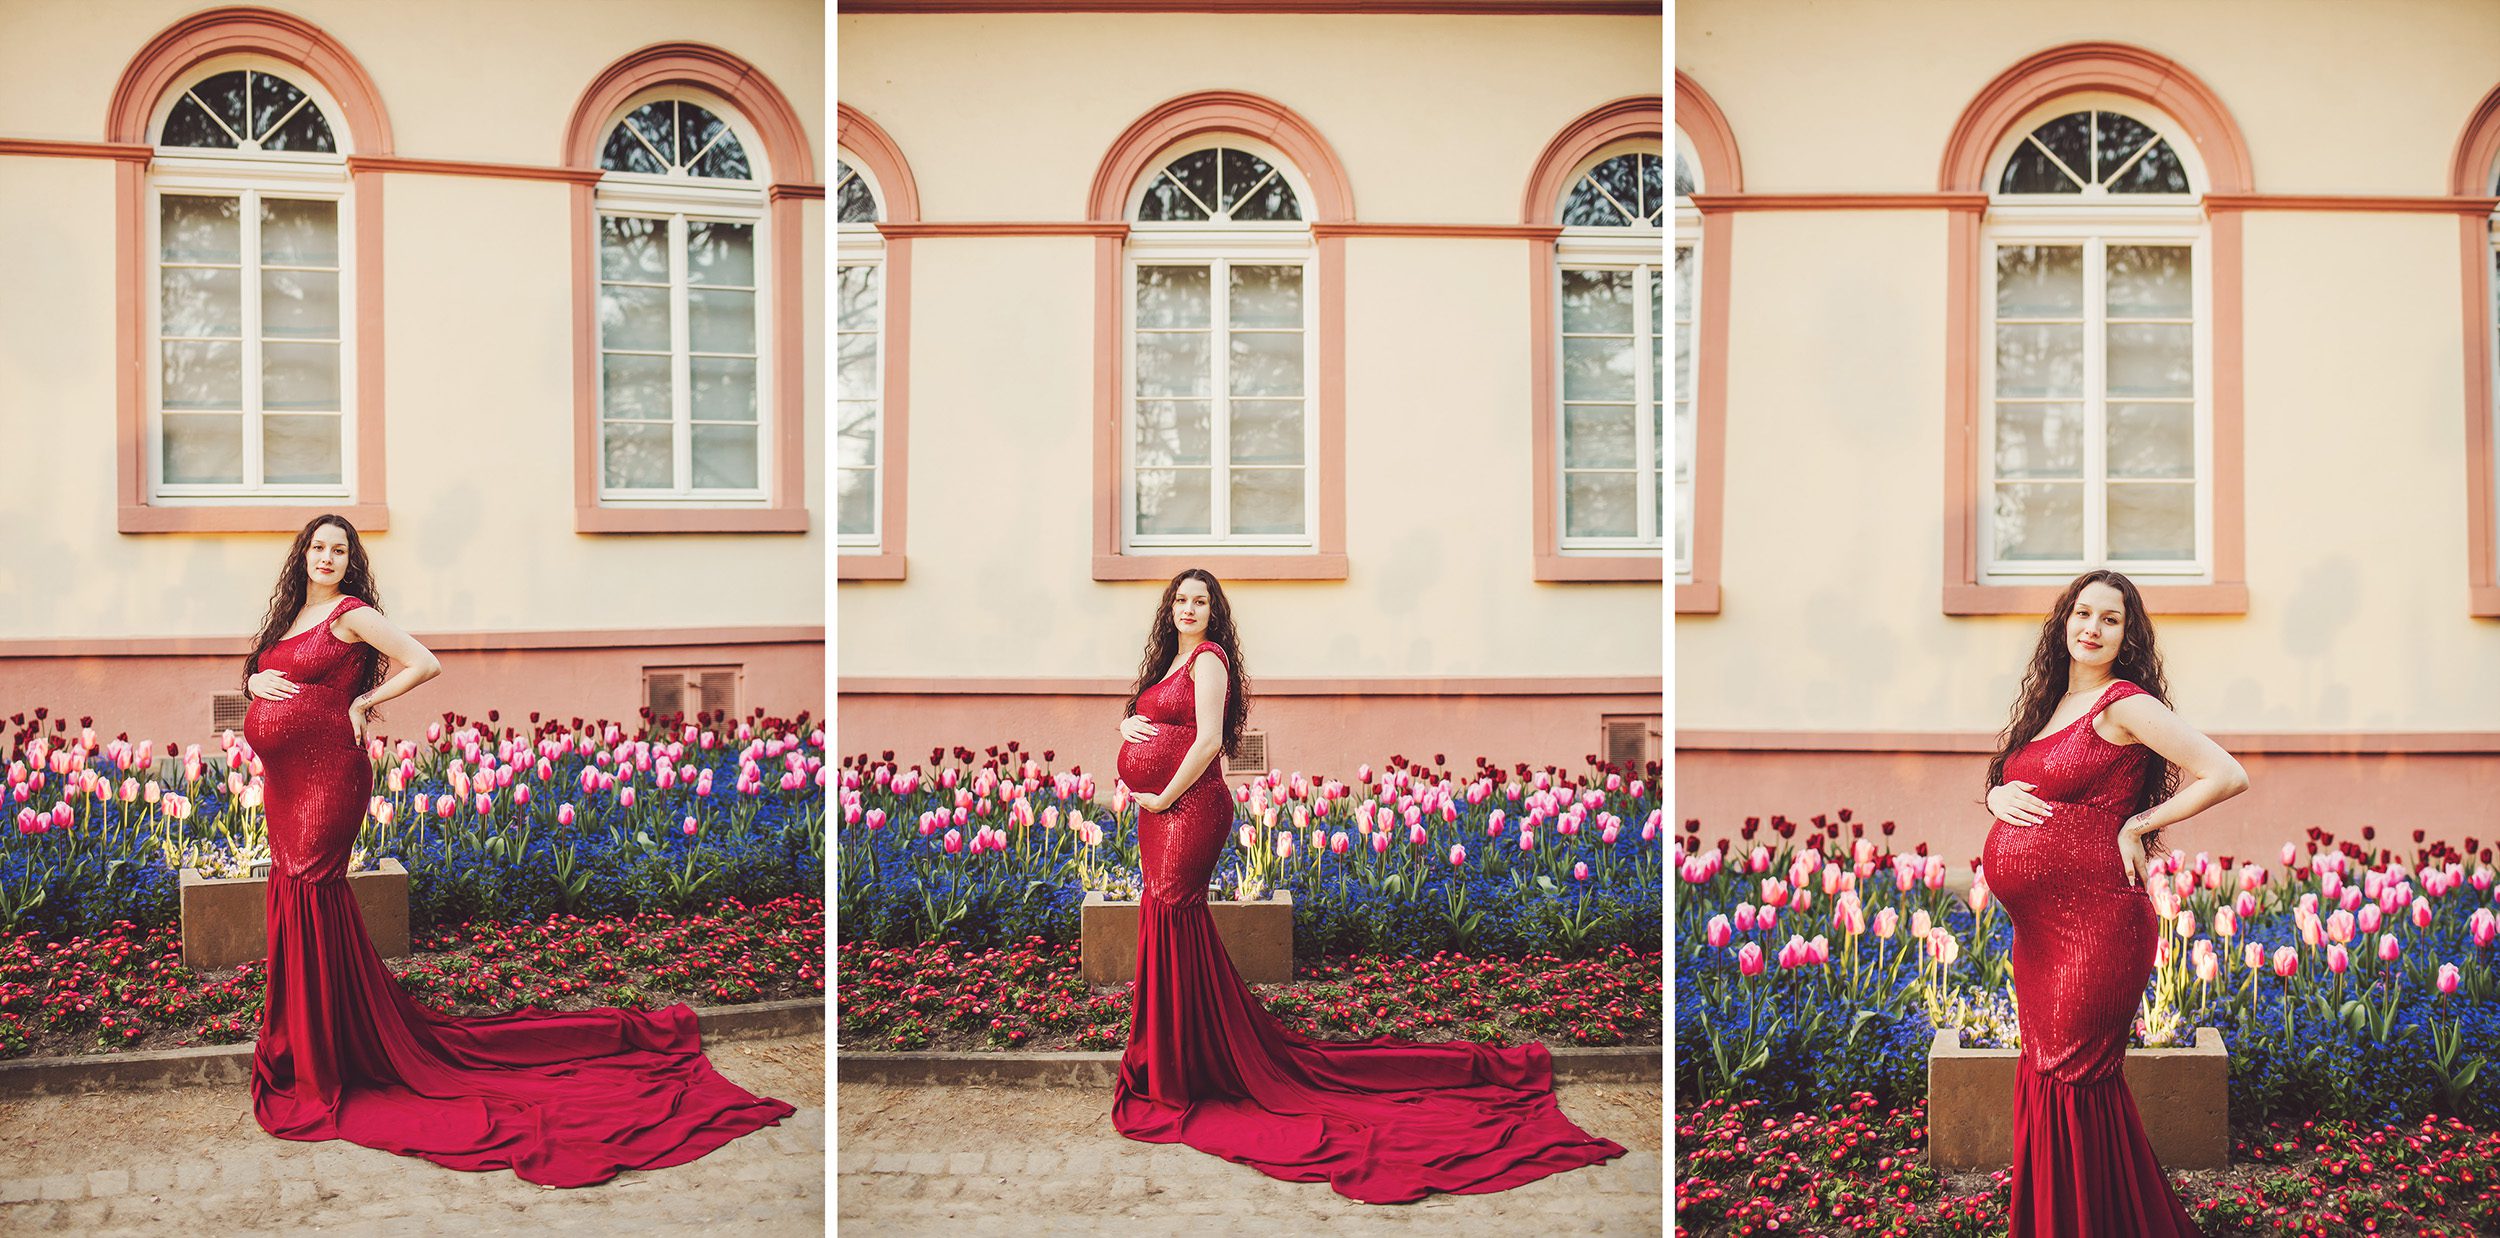 A beautiful finish for Kallyn's maternity session, next to the spring tulips of the Bad Homburg Kurpark bank.